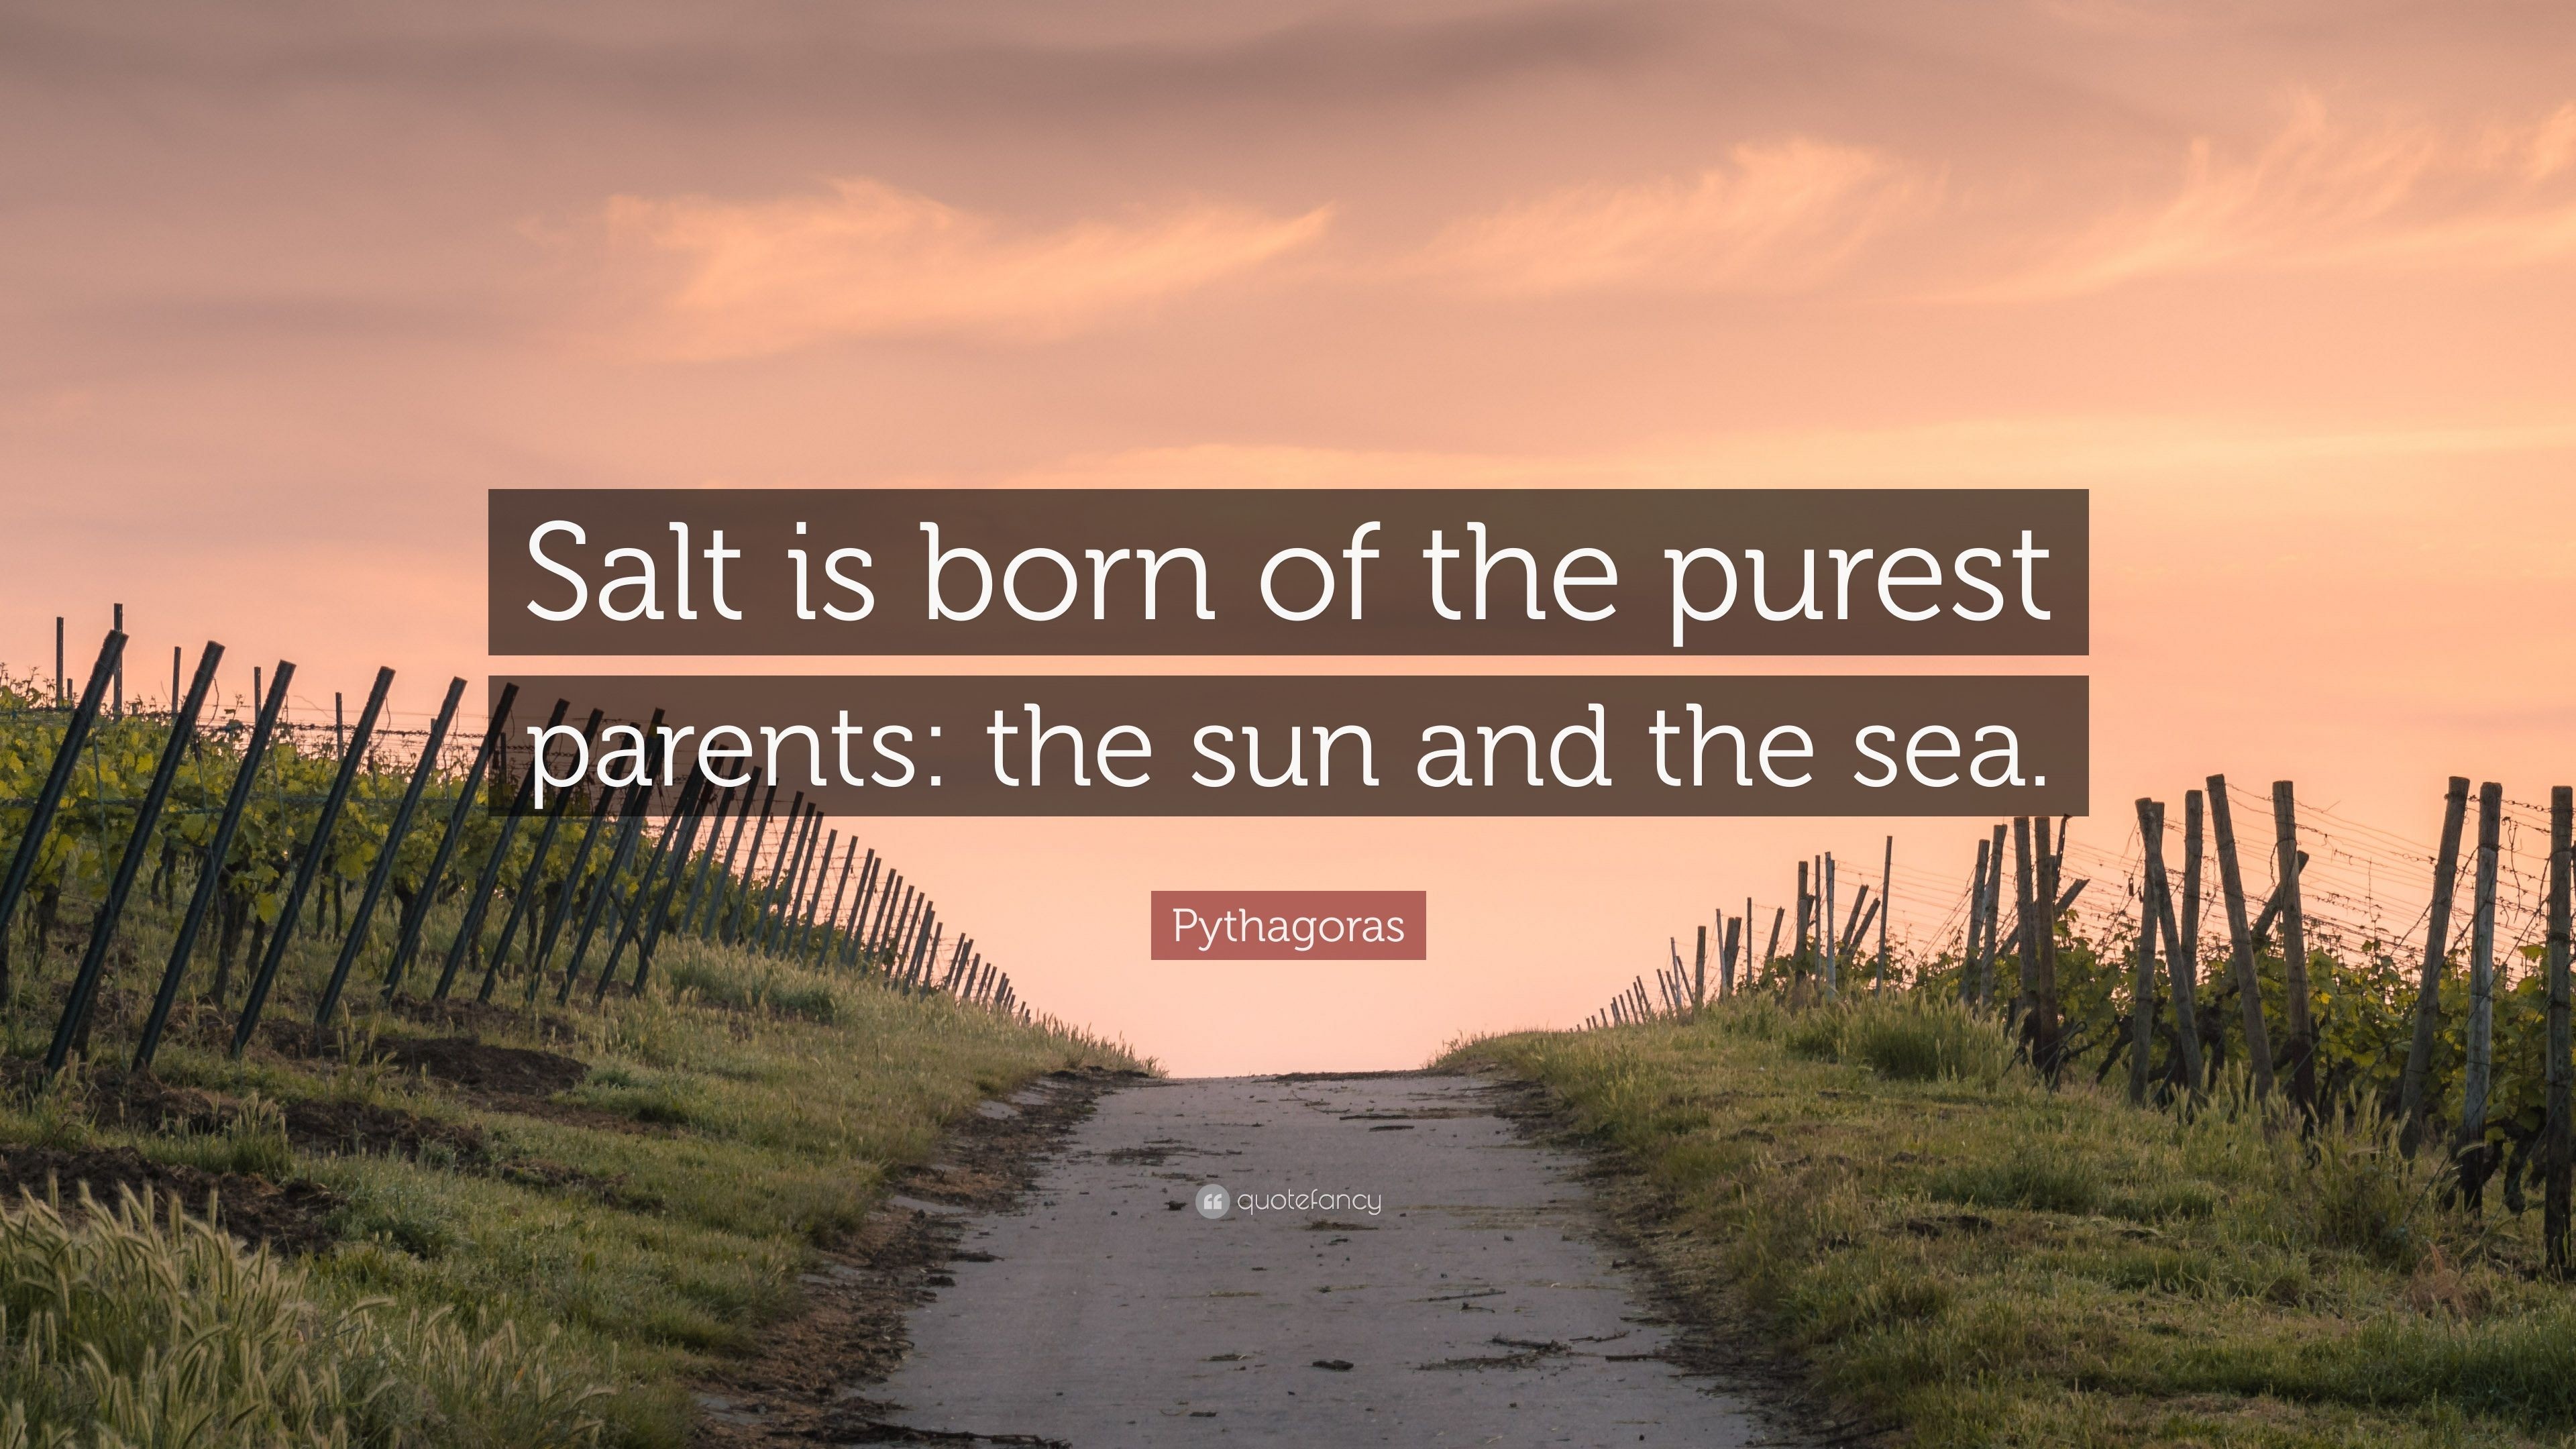 3840x2160 Pythagoras Quote: “Salt is born of the purest parents: the sun and the